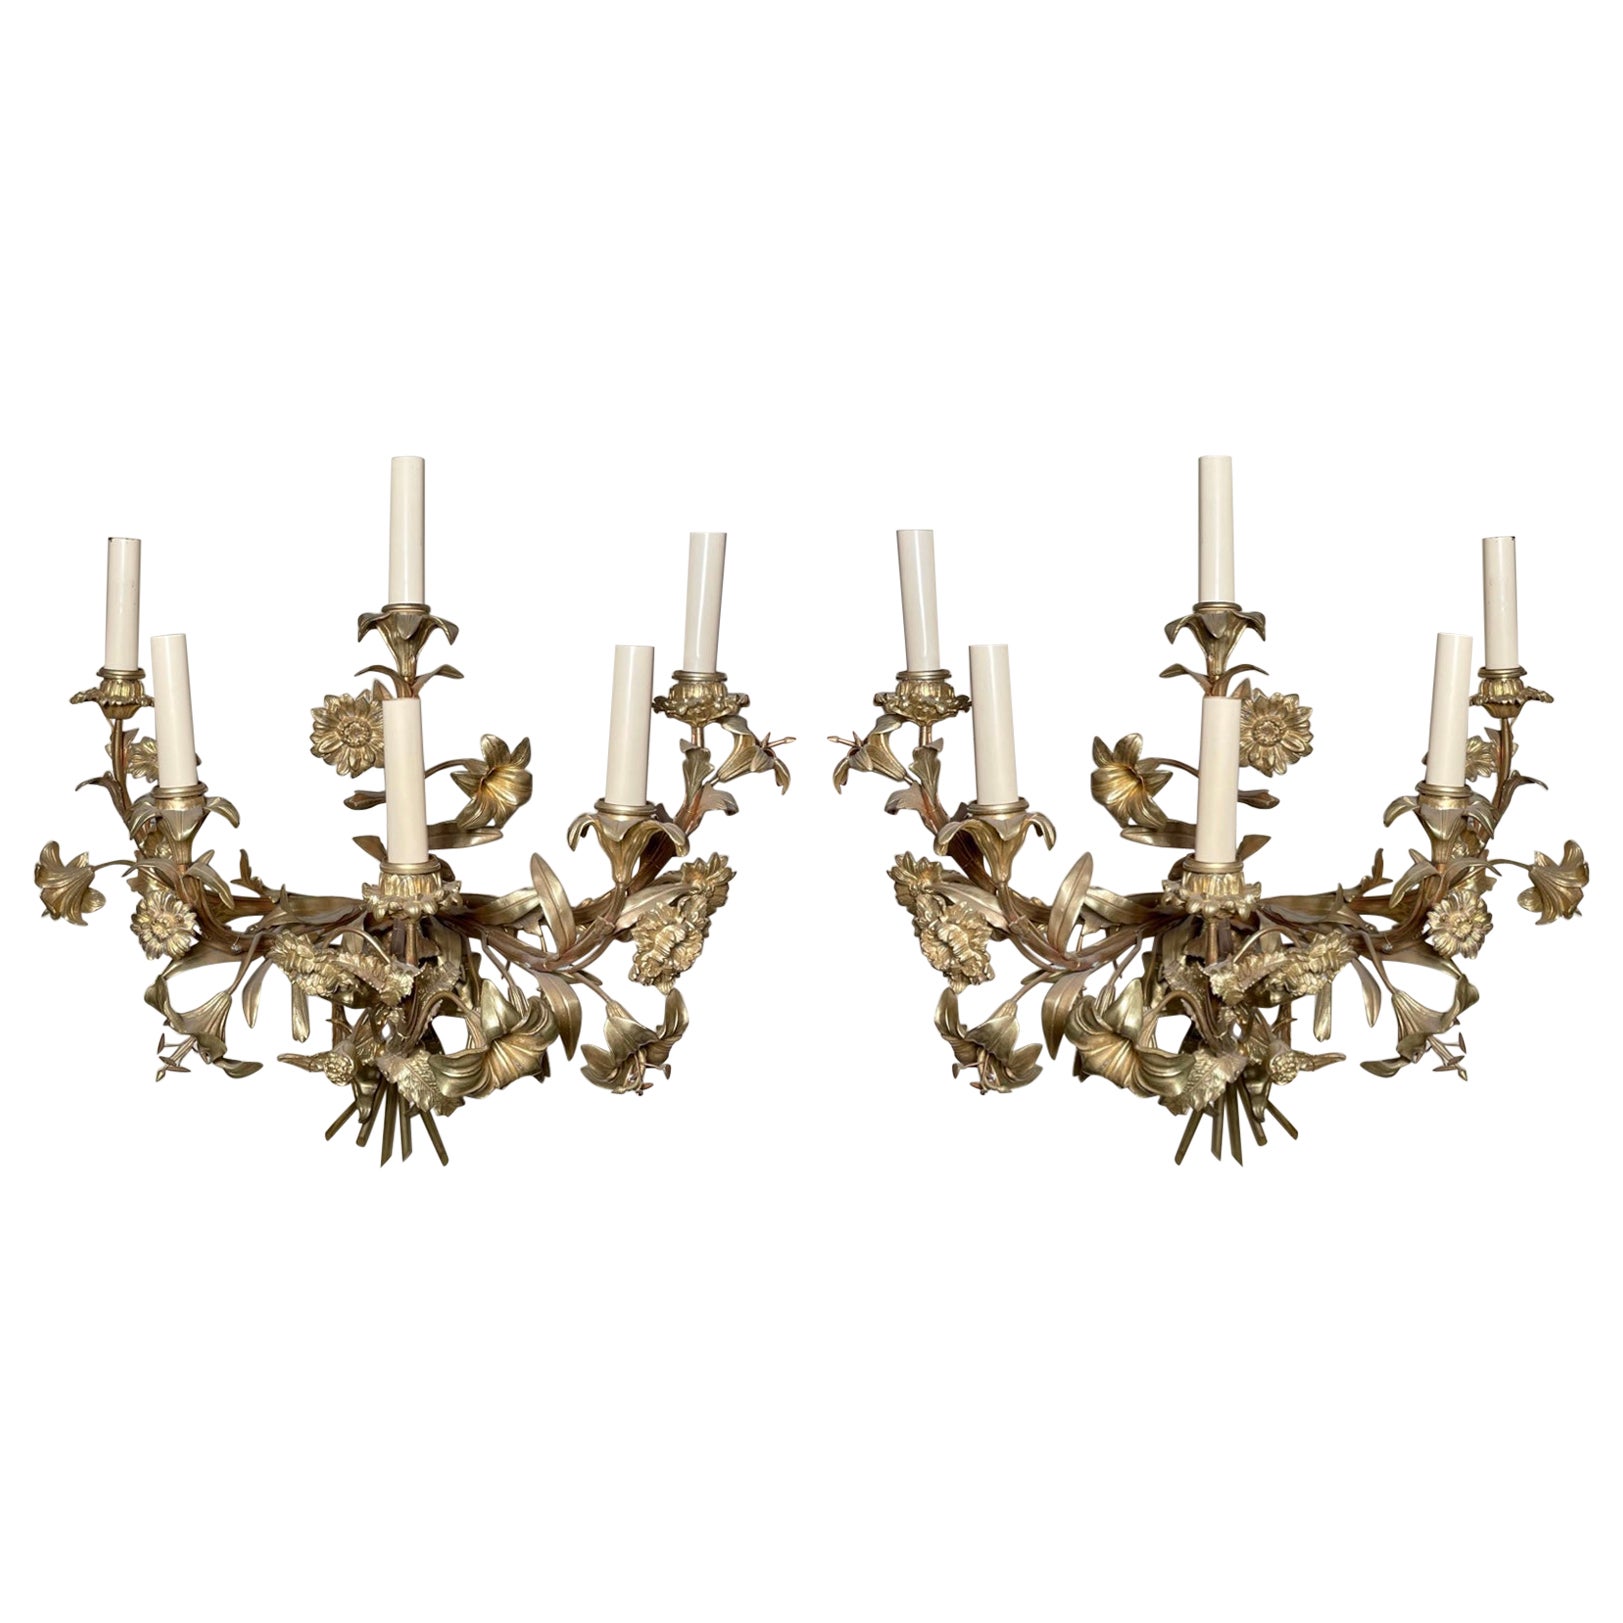 Pair of Antique French Provincial Floral Sconces circa 1870 For Sale